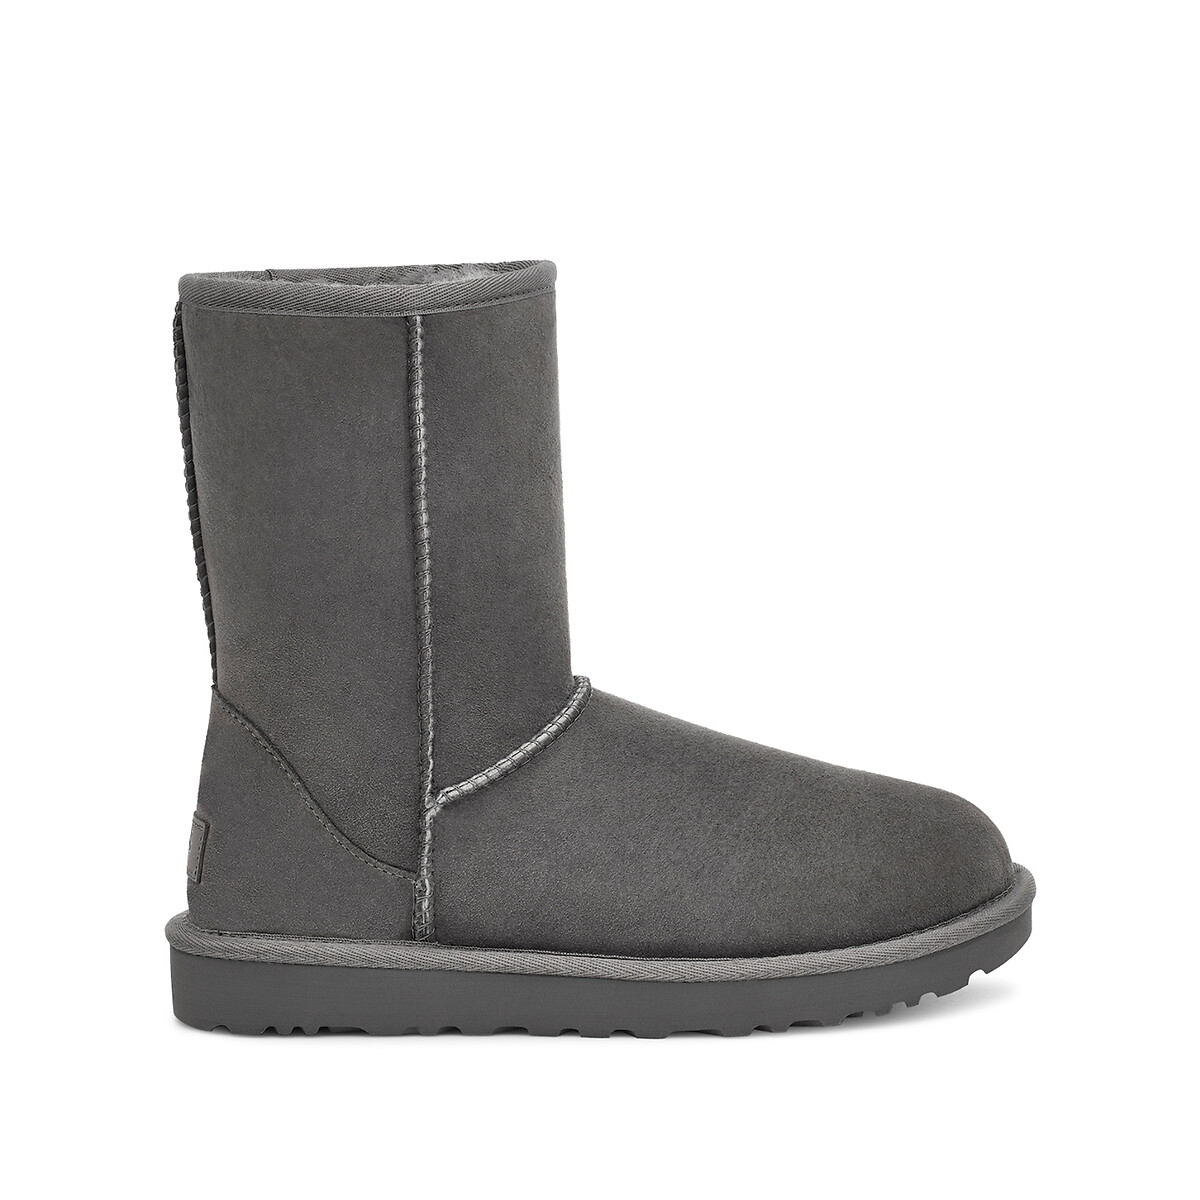 W classic short ii ankle boots in suede with faux fur lining, grey, Ugg ...